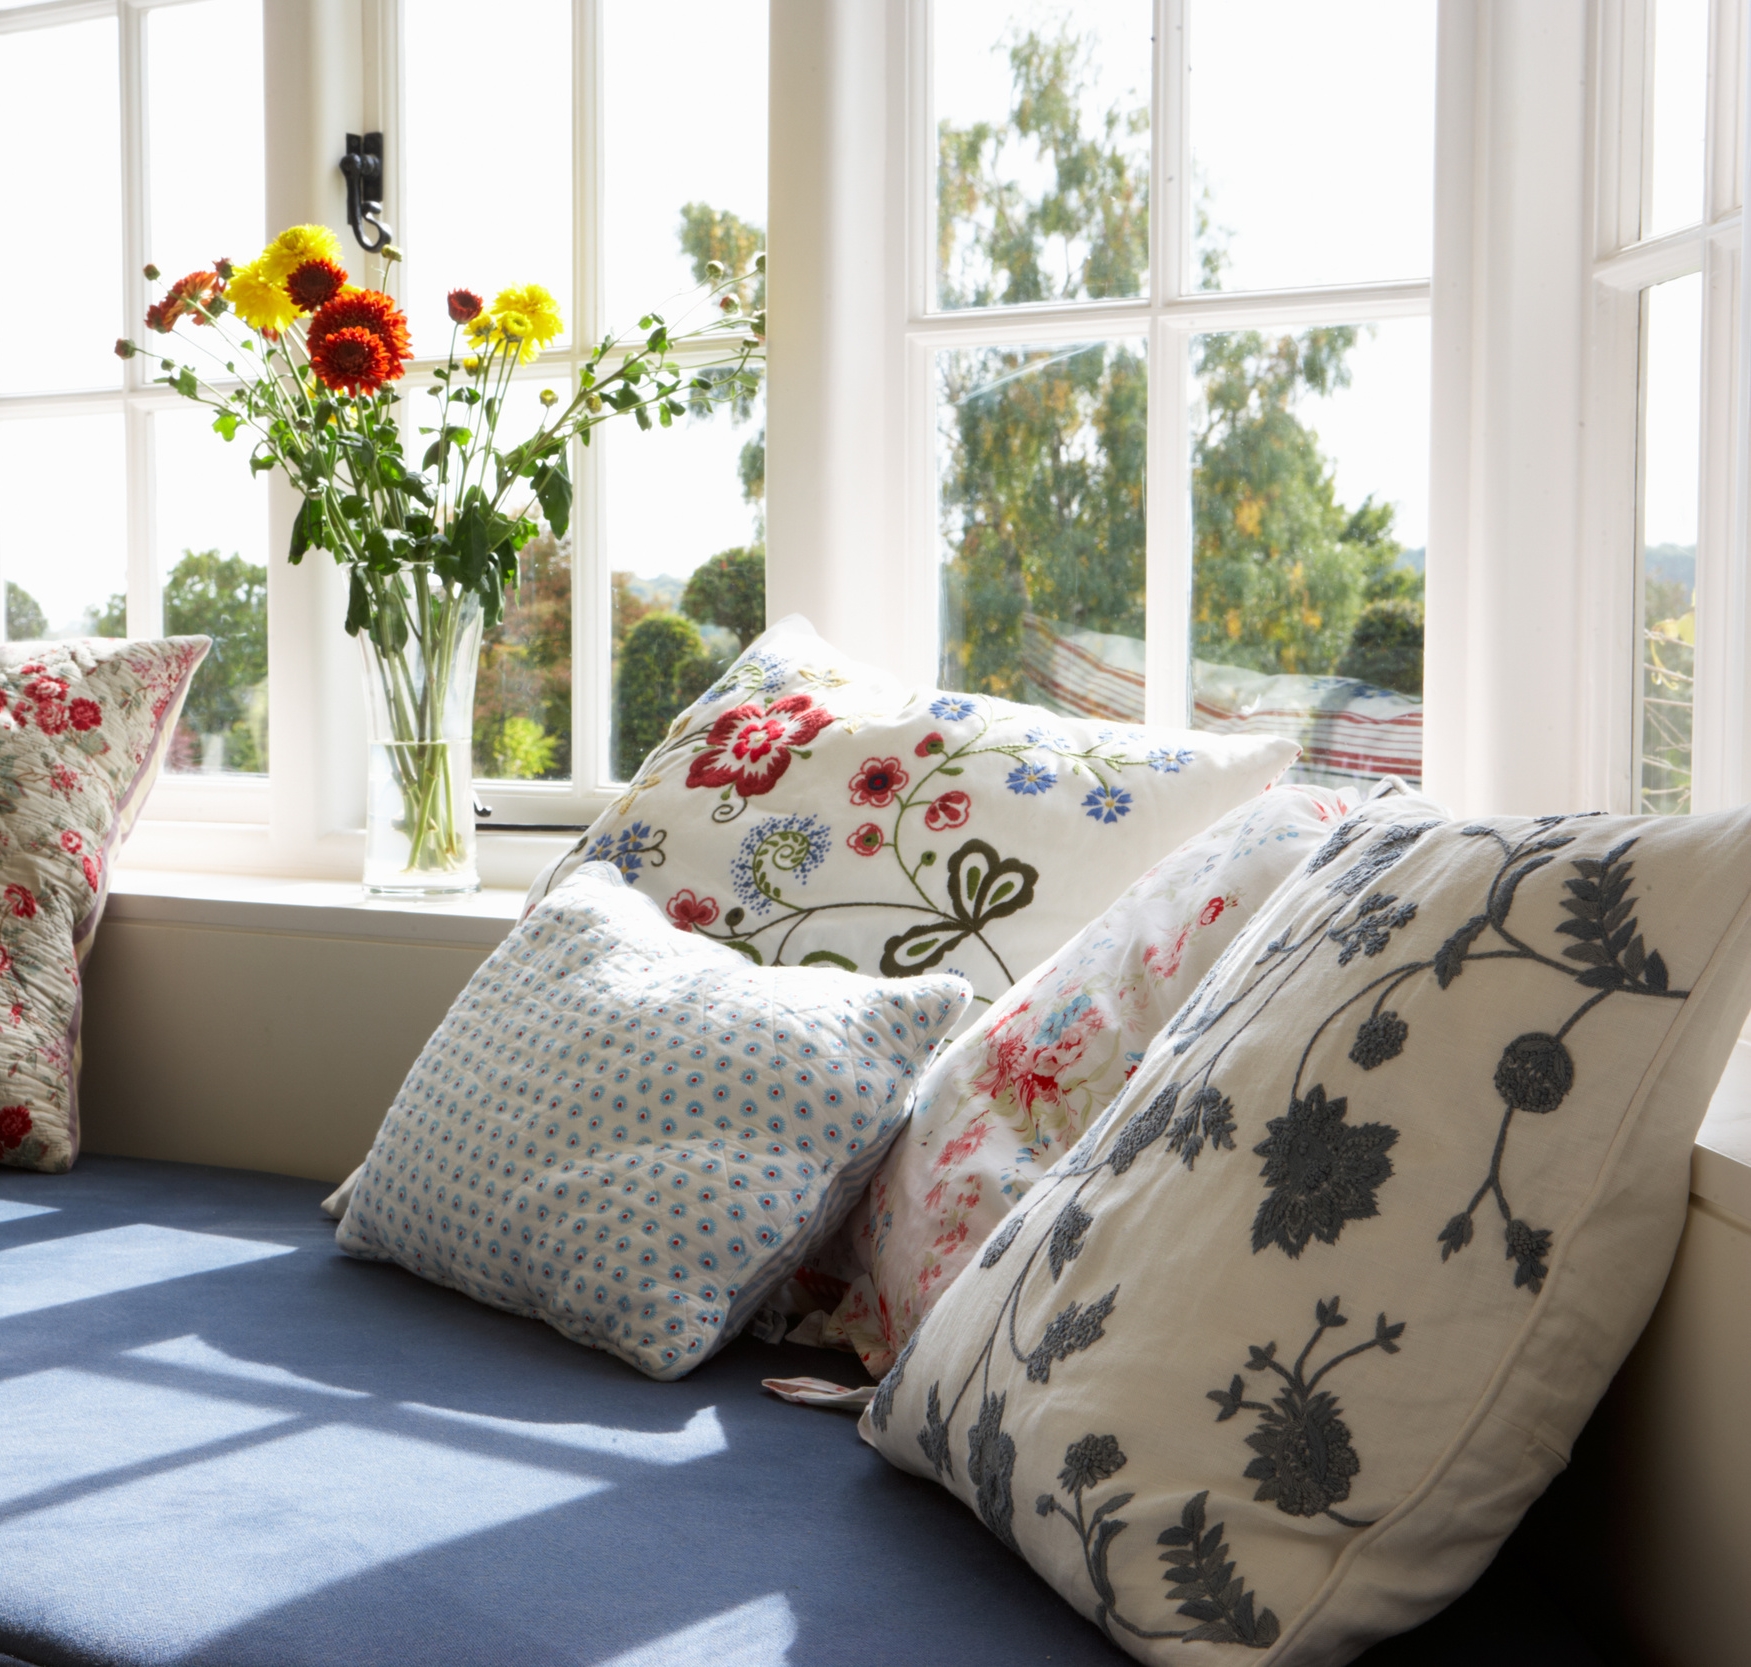 Embroidered Floral Pillows on Blue Seats in Window